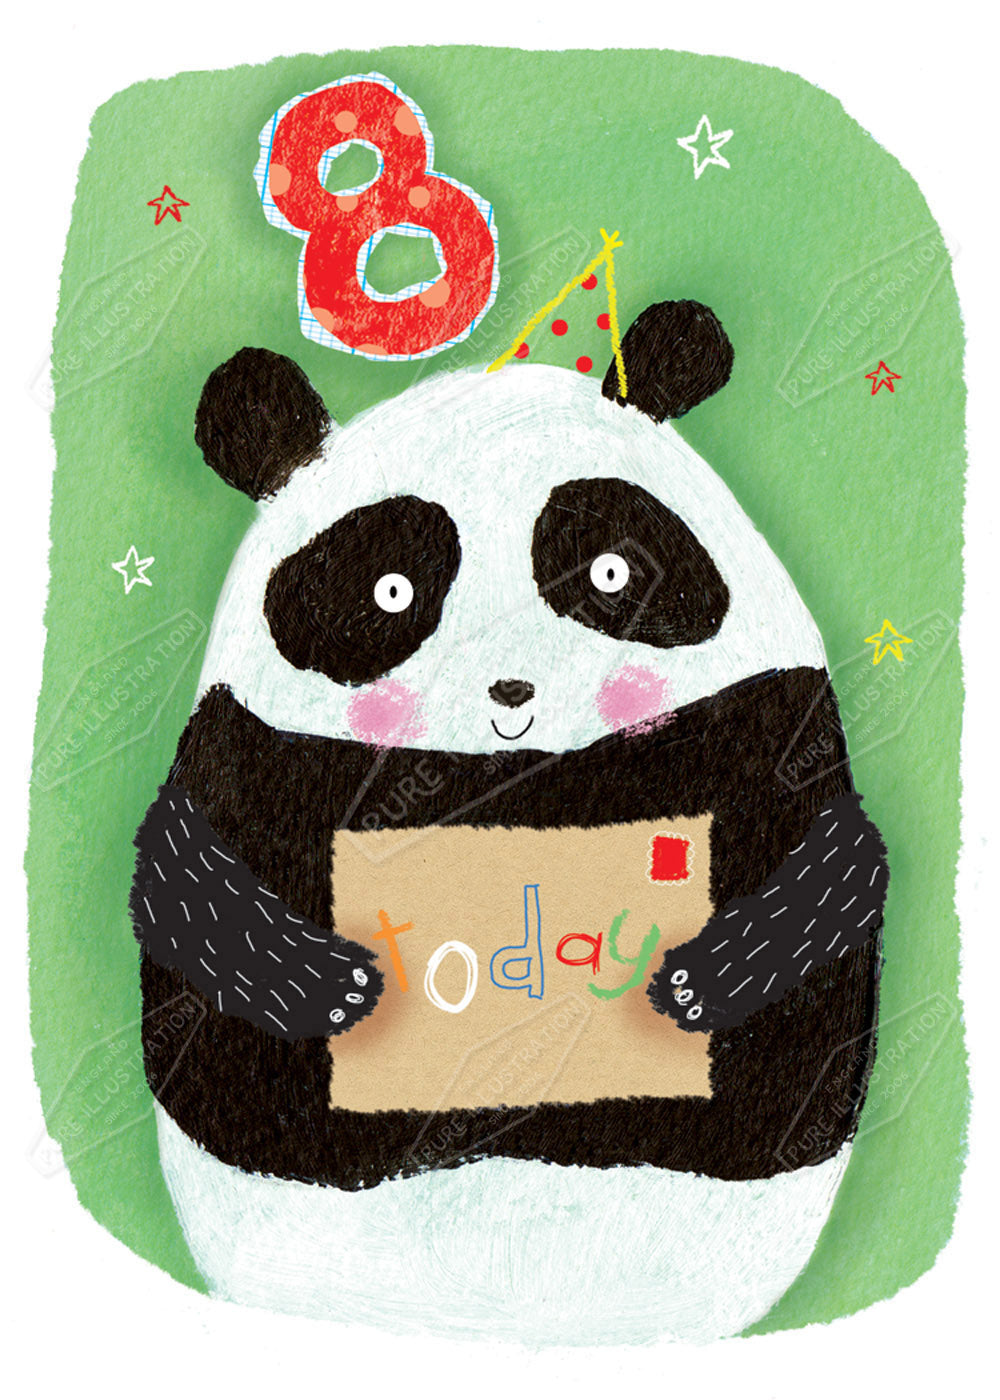 Birthday Panda Age Card Greeting Card Design by Cory Reid for Pure art Licensing Agency & Surface Design Studio